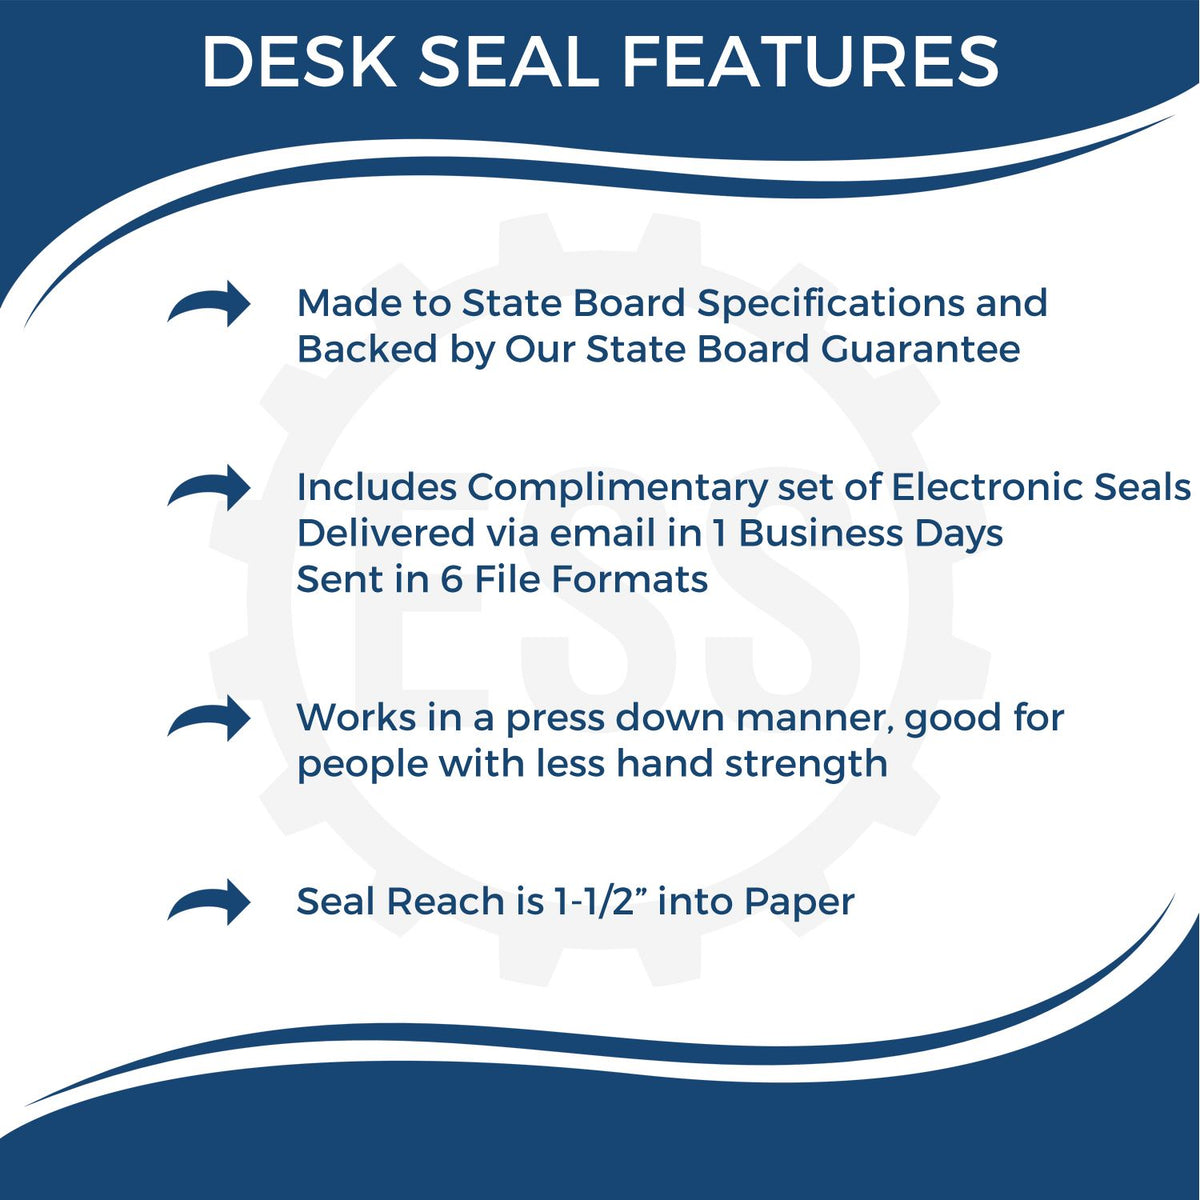 A picture of an infographic highlighting the selling points for the Nebraska Desk Architect Embossing Seal